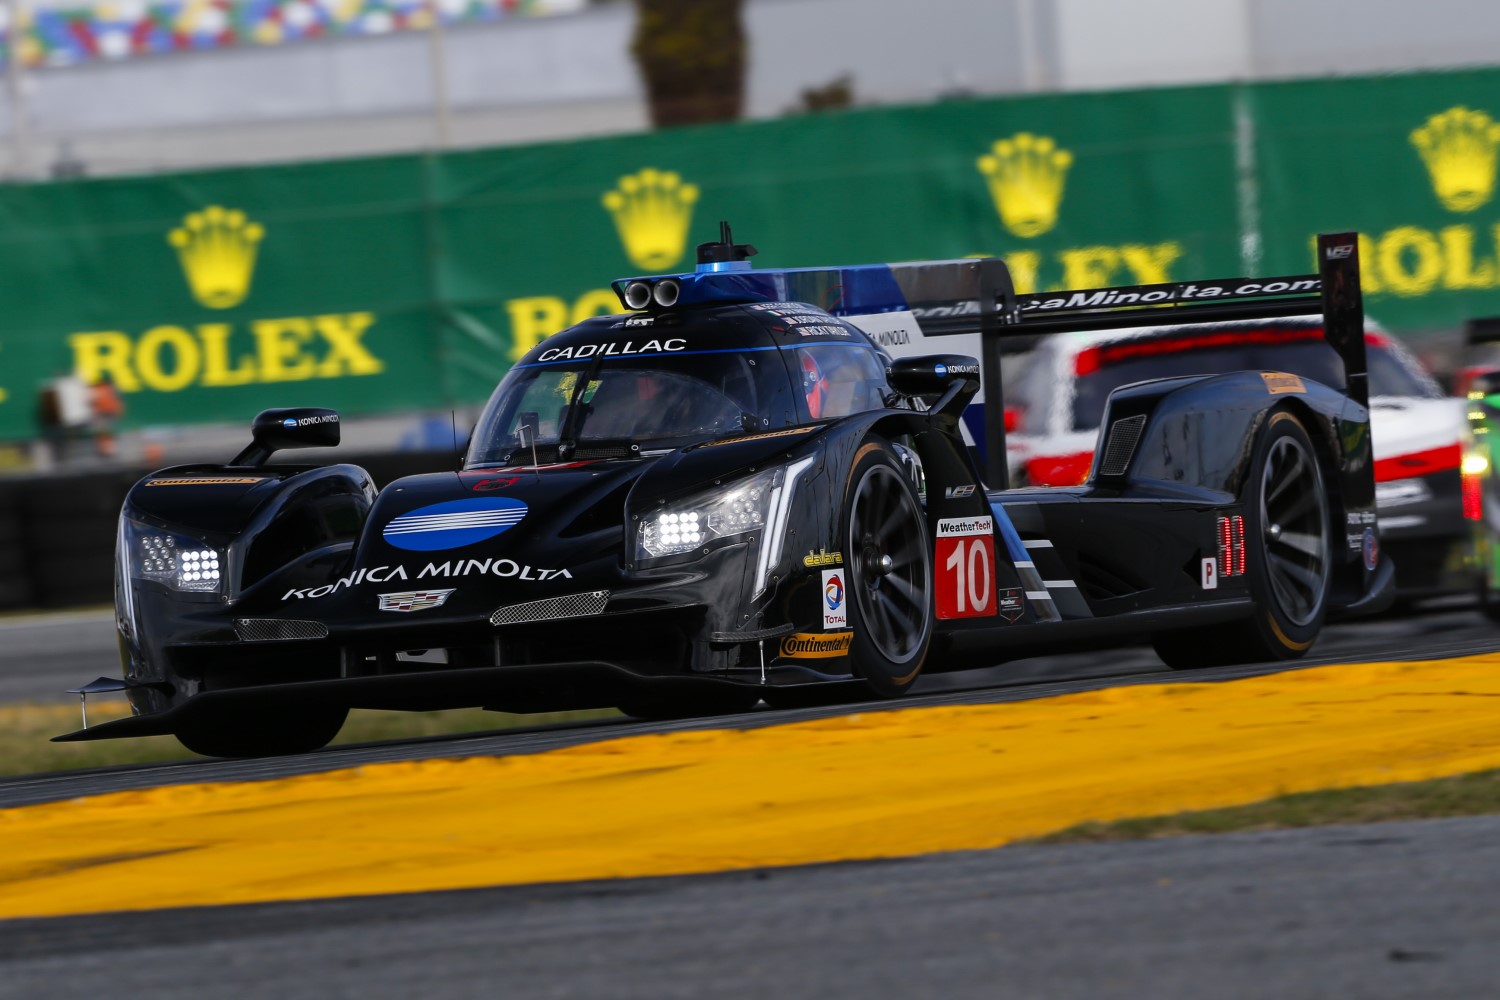 Your leading Cadllac at the Rolex 24 